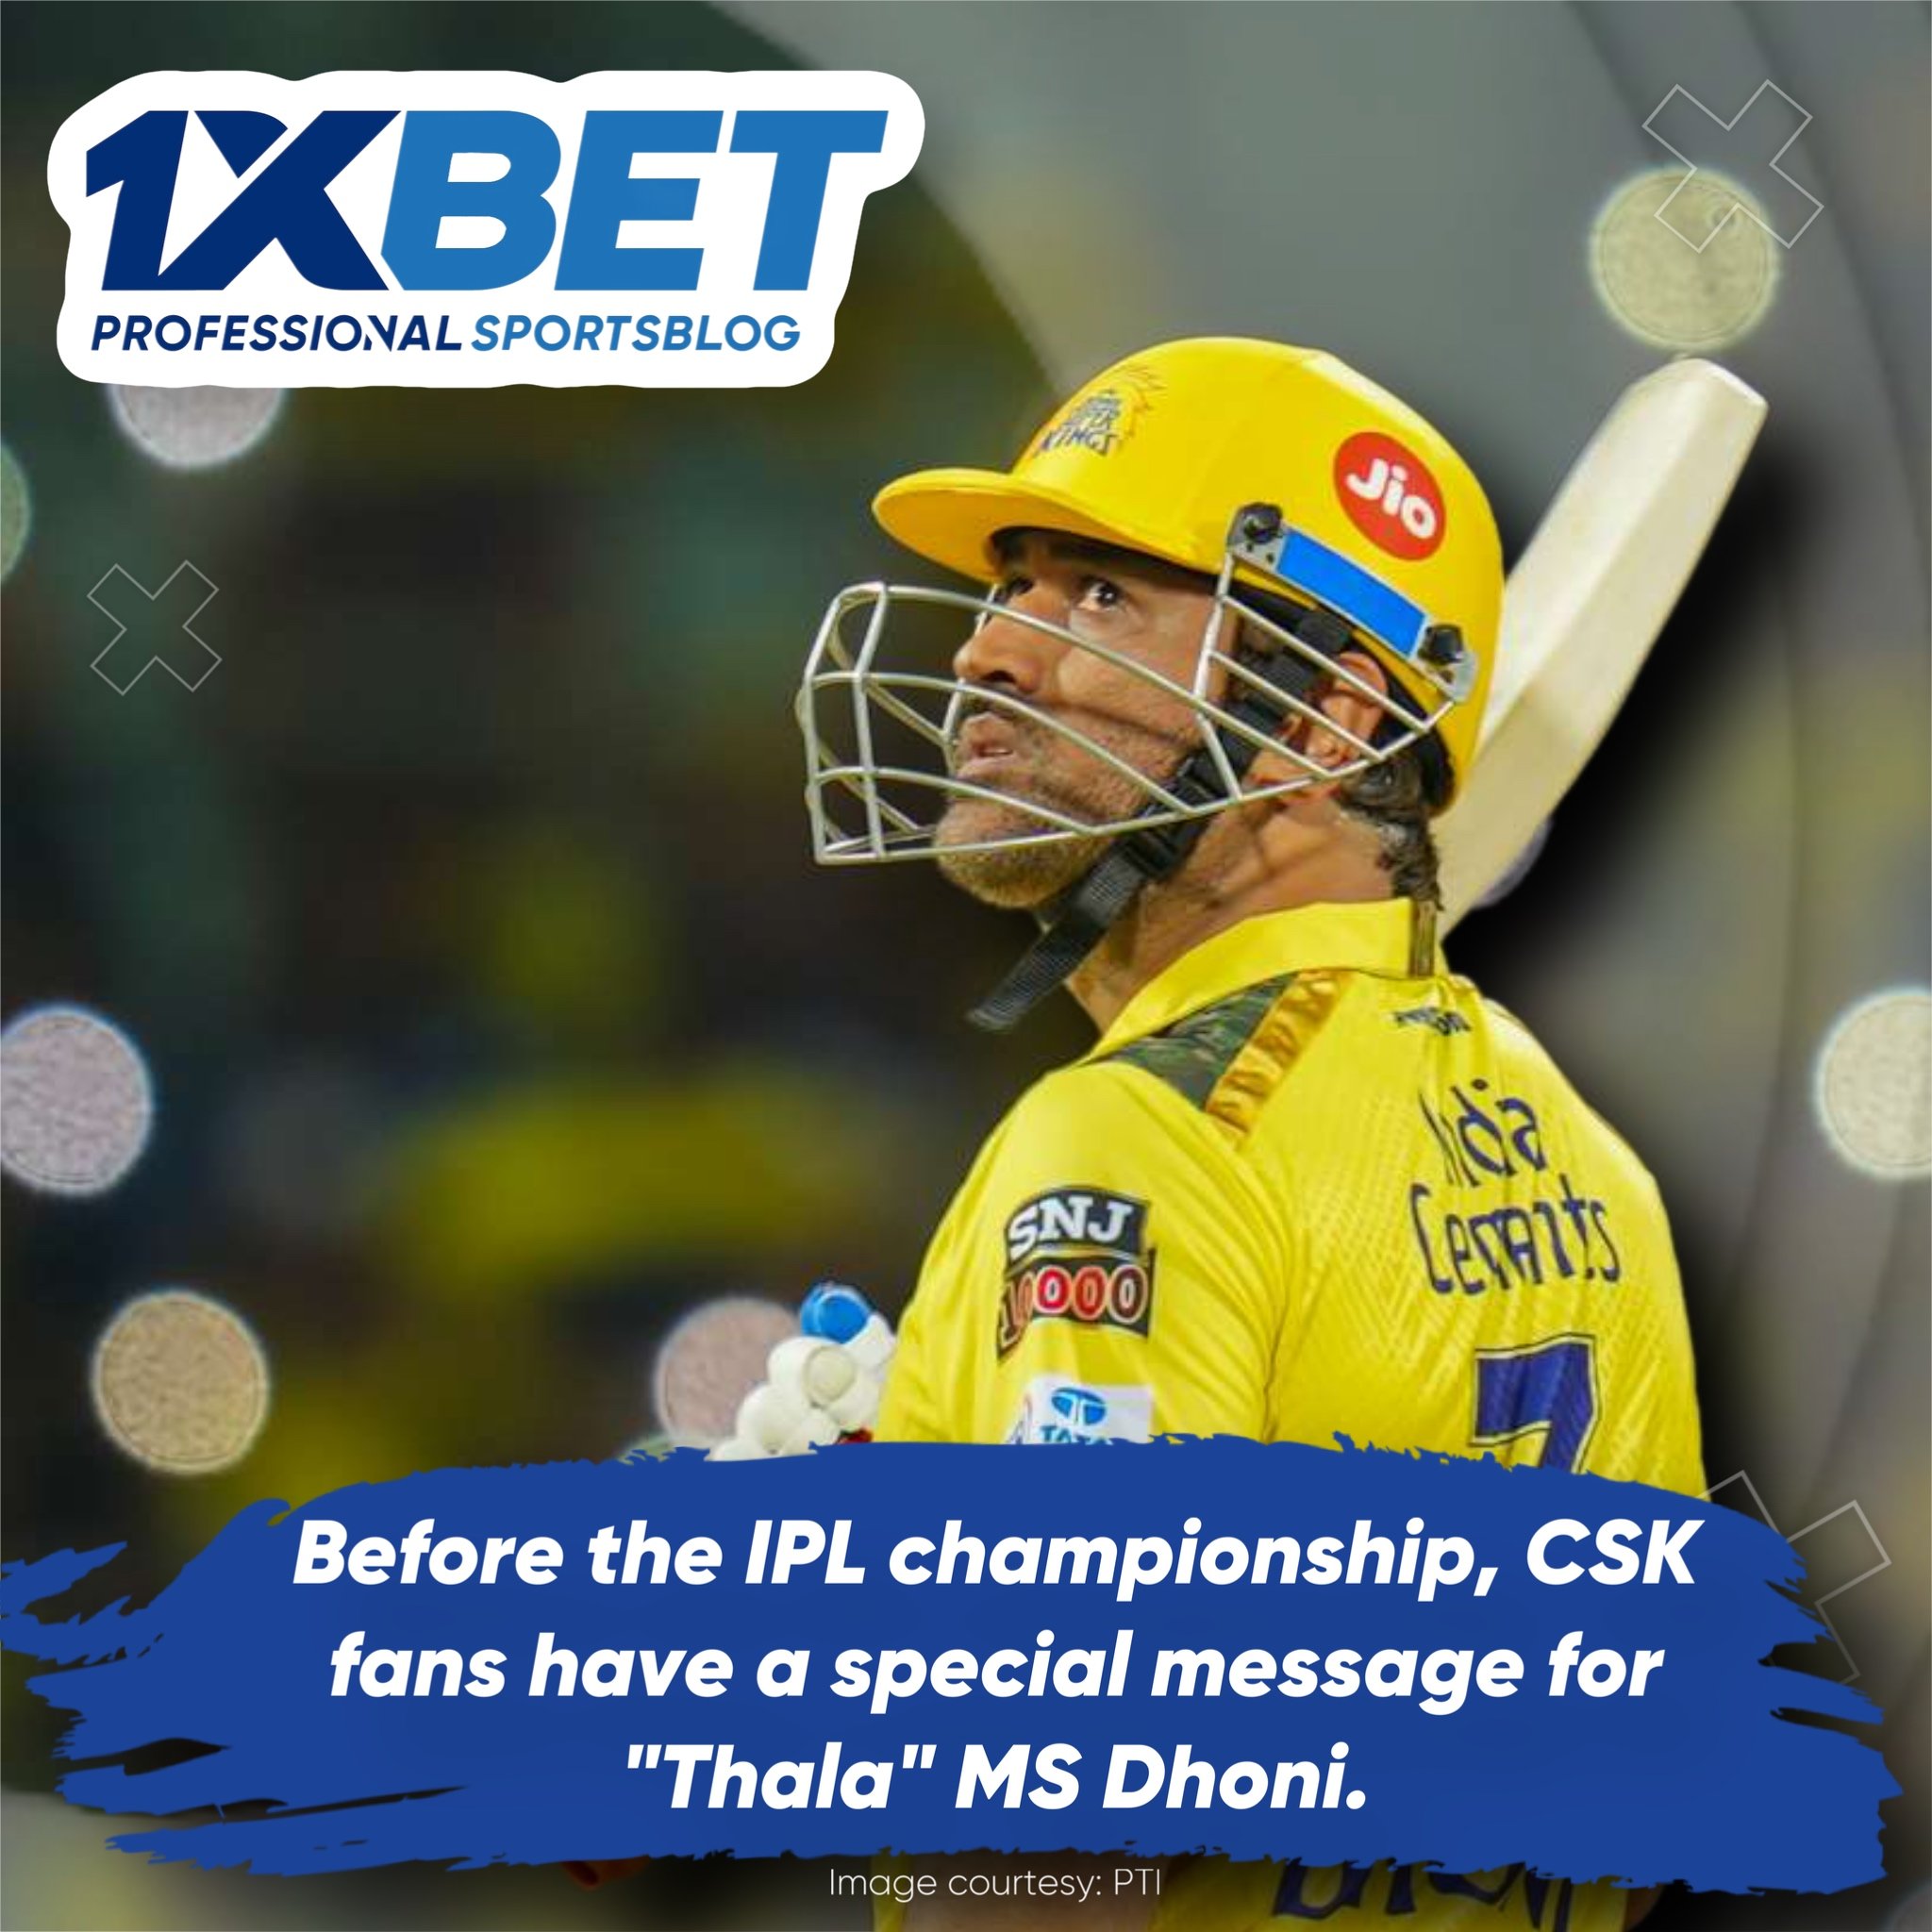 Before the IPL championship, CSK fans have a special message for "Thala" MS Dhoni.